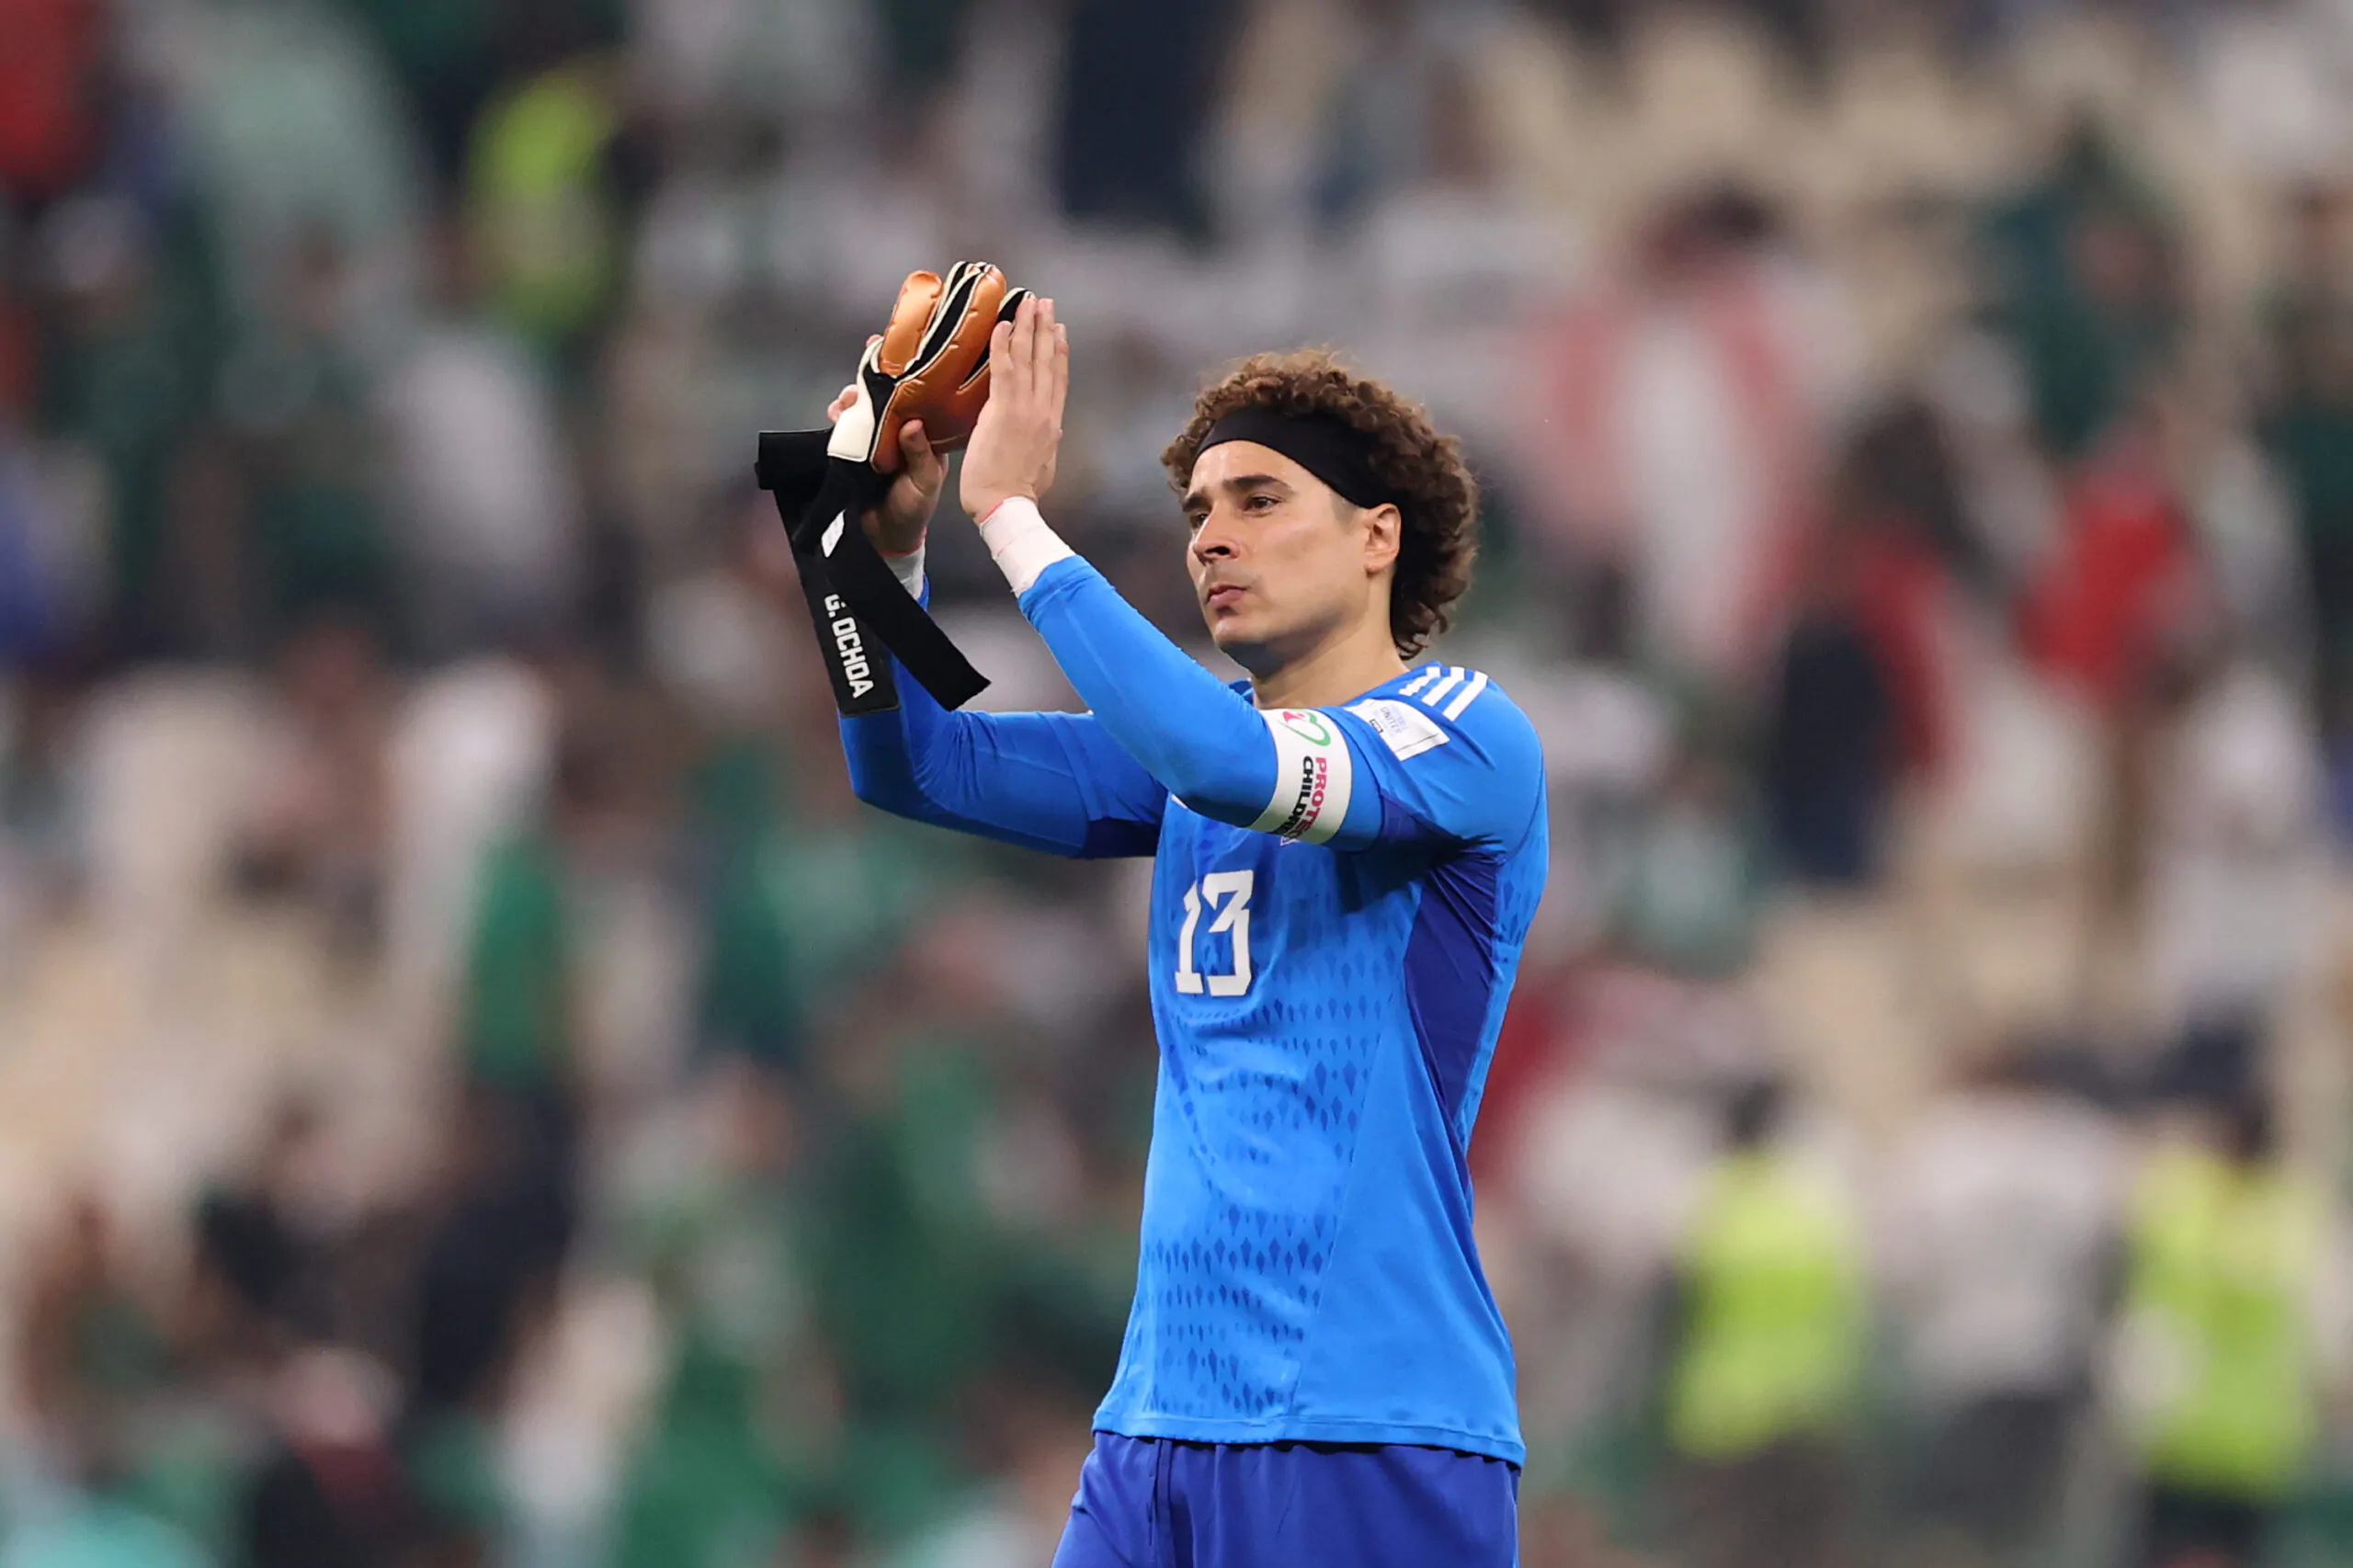 Salernitana have reached agreement with Guillermo Ochoa, who will join on a free after terminating his contract with Club America.